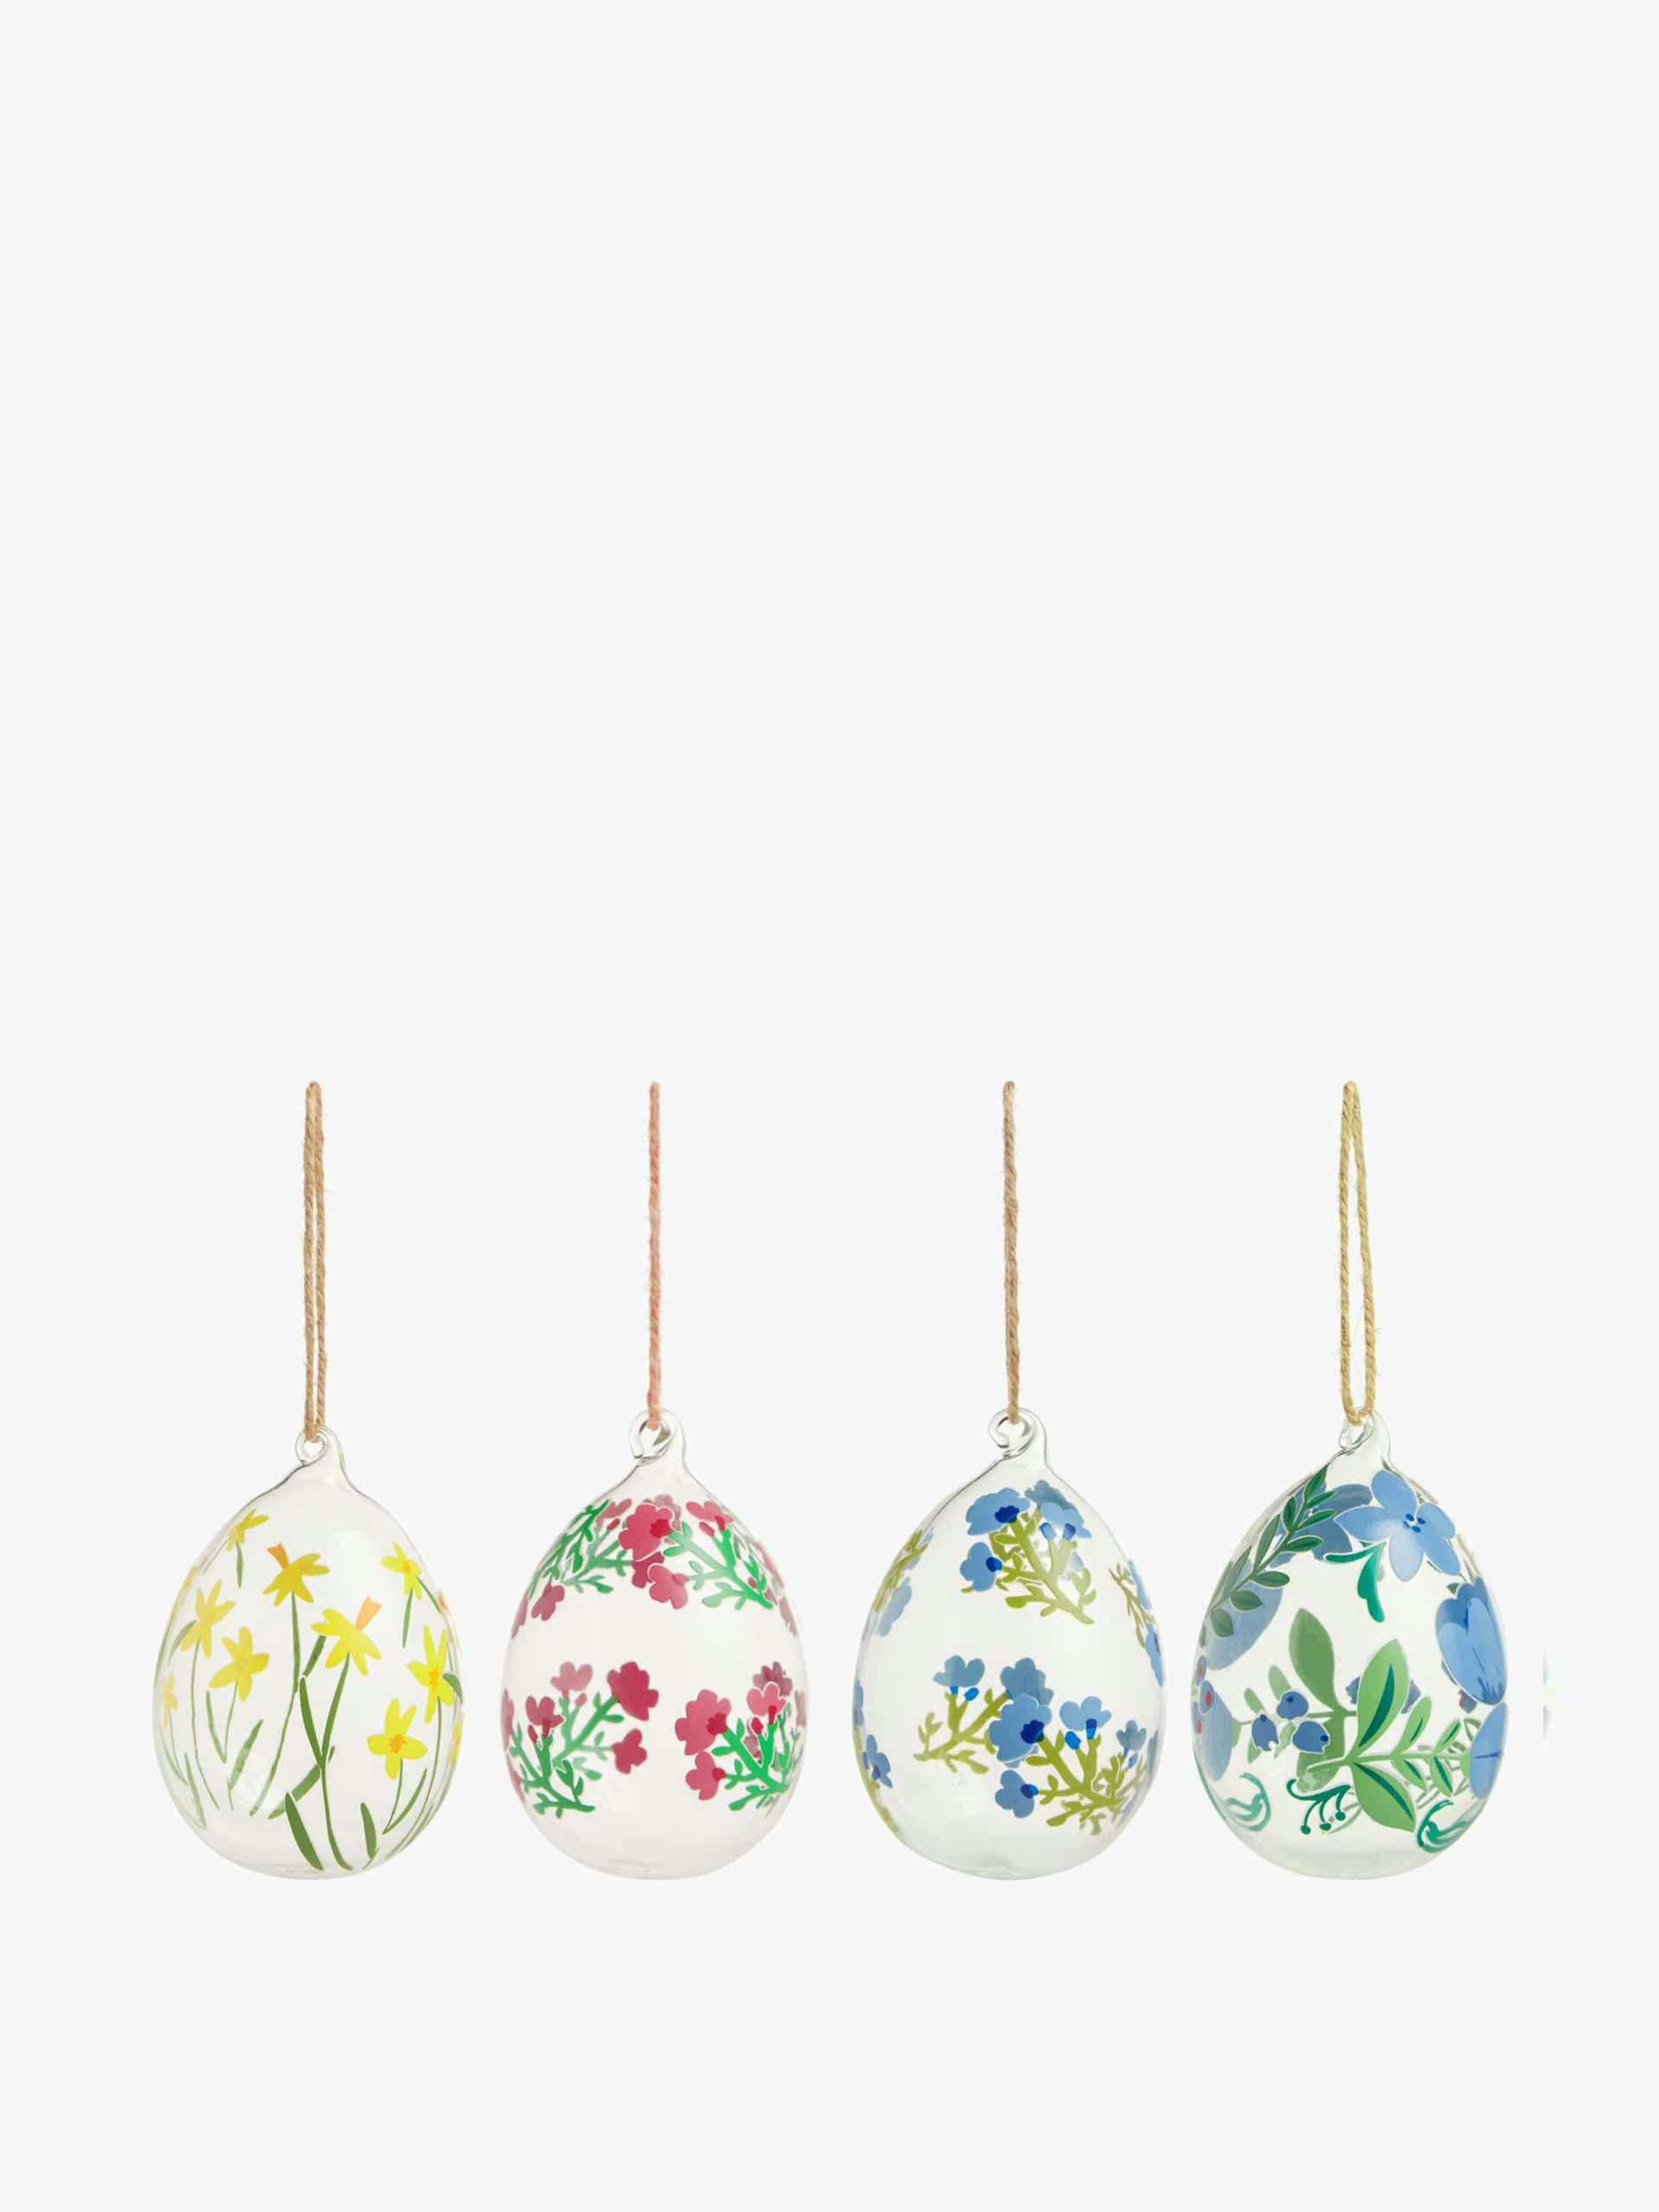 Glass painted eggs (set of 4)